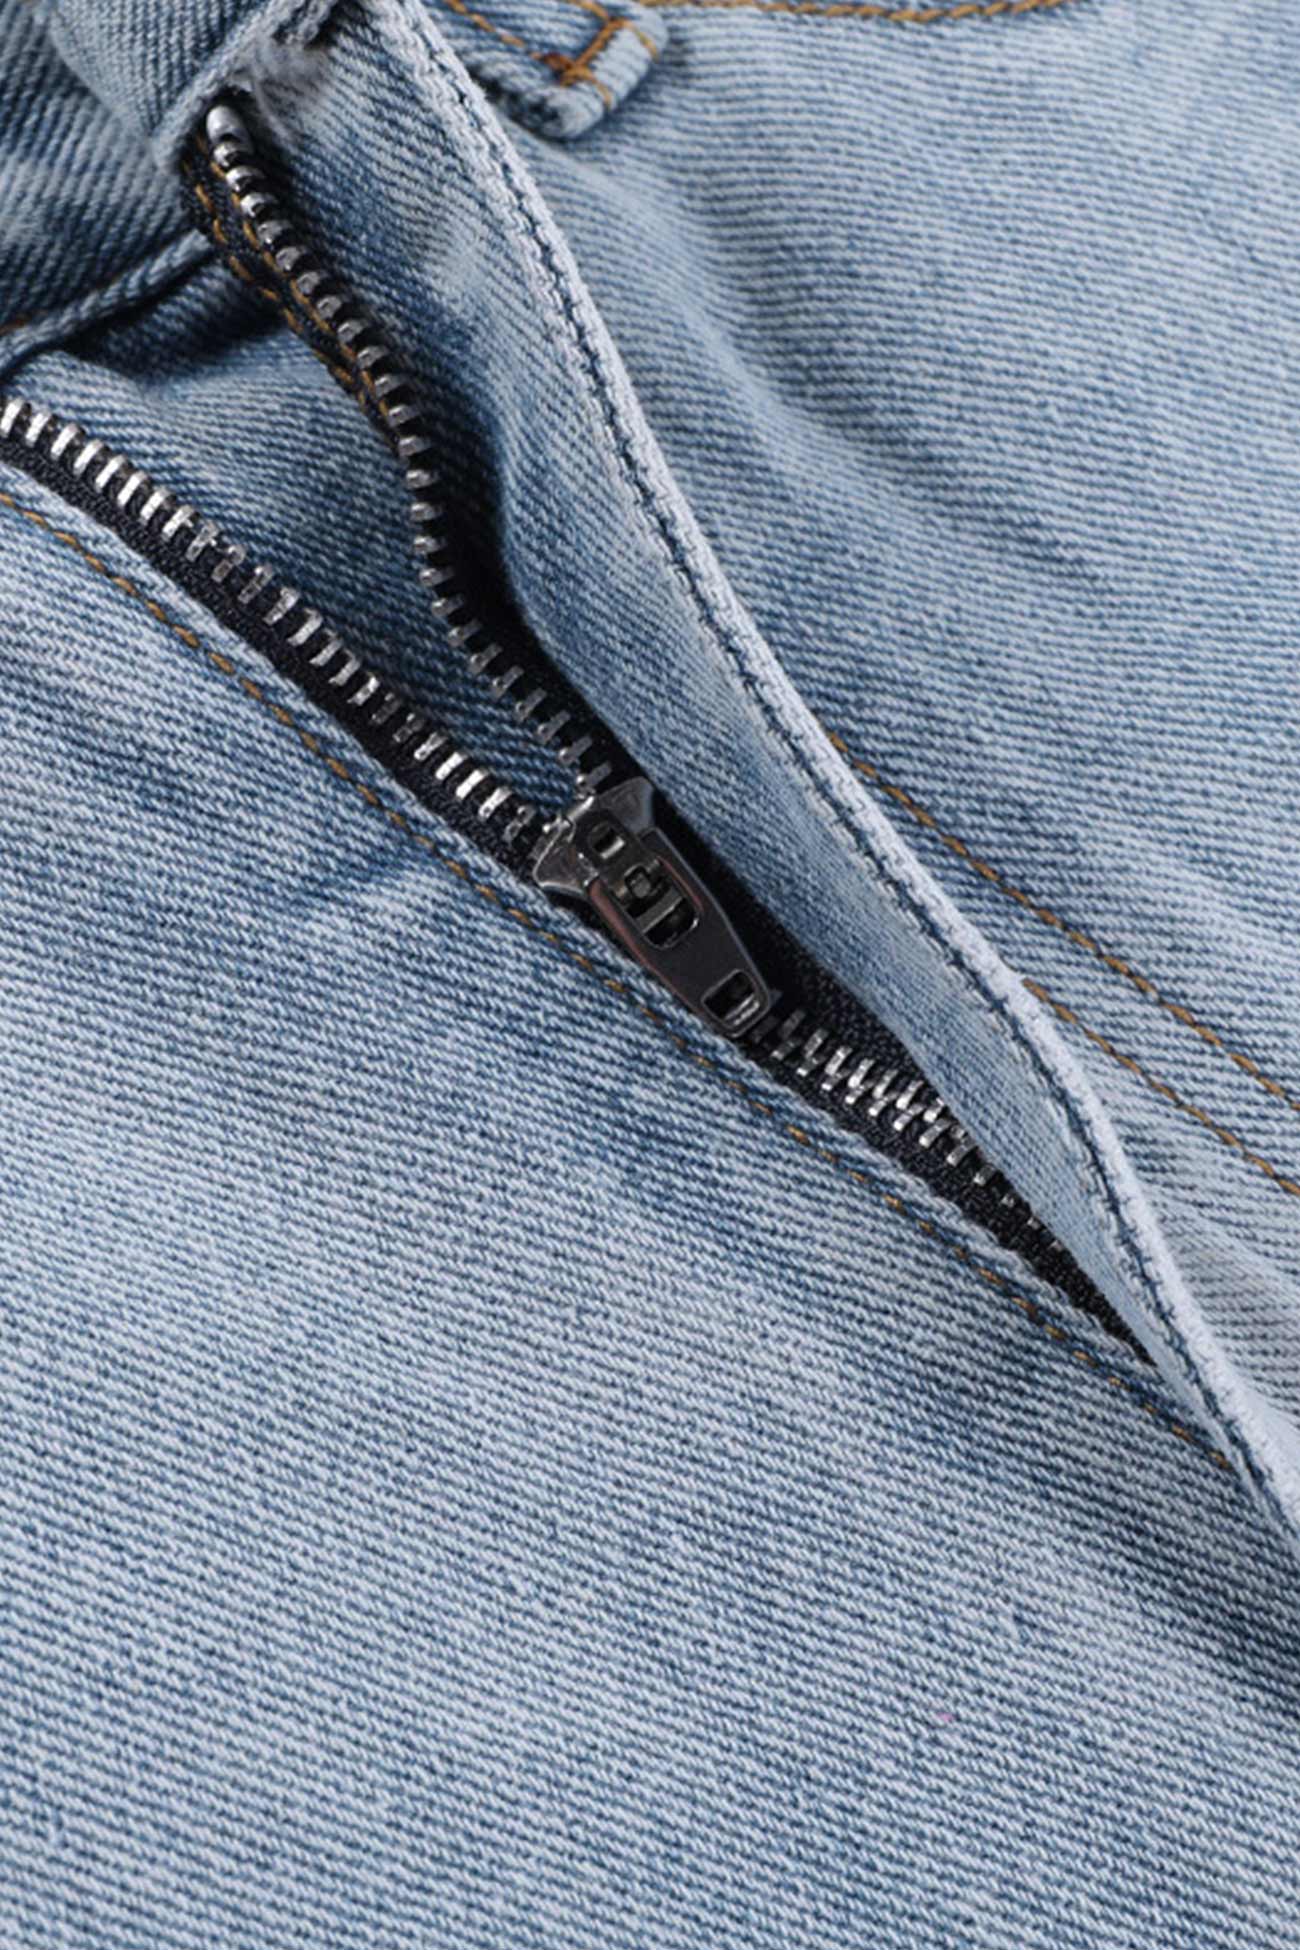 The Best Way to Fix Your Ripped Jeans | GQ